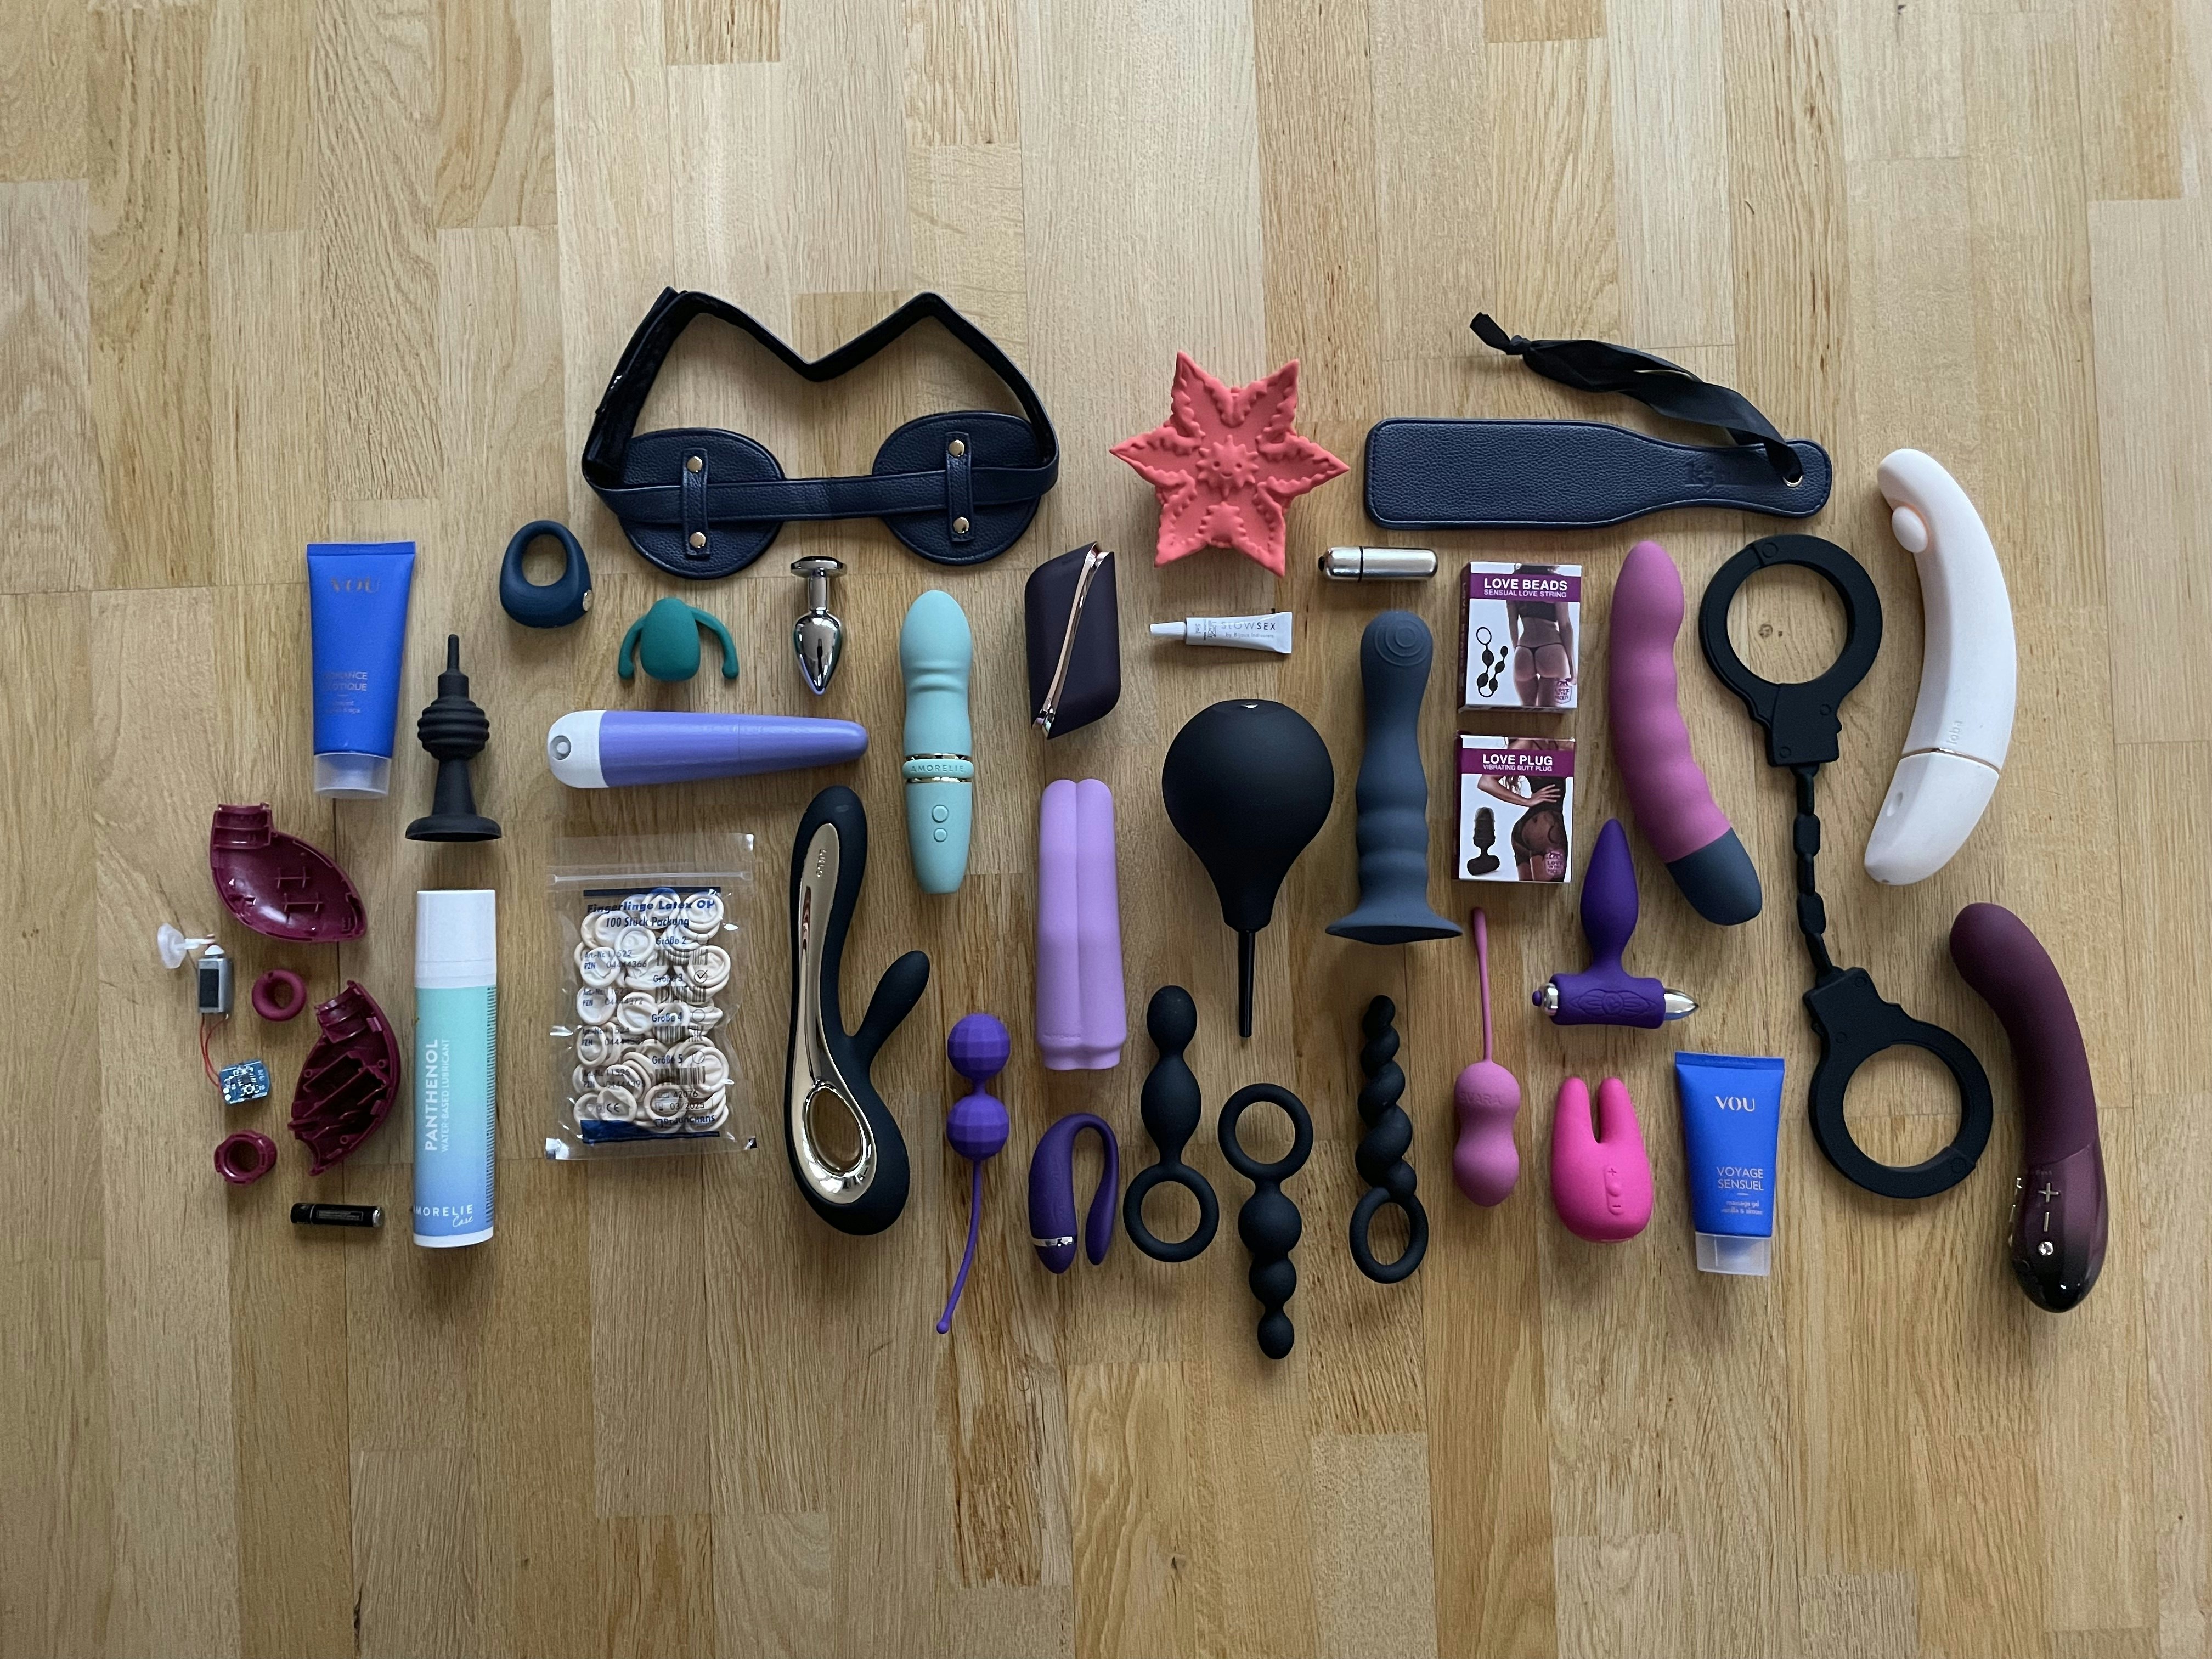 My Sex Toy Collection as of January 2022 Carolyn Stransky pic